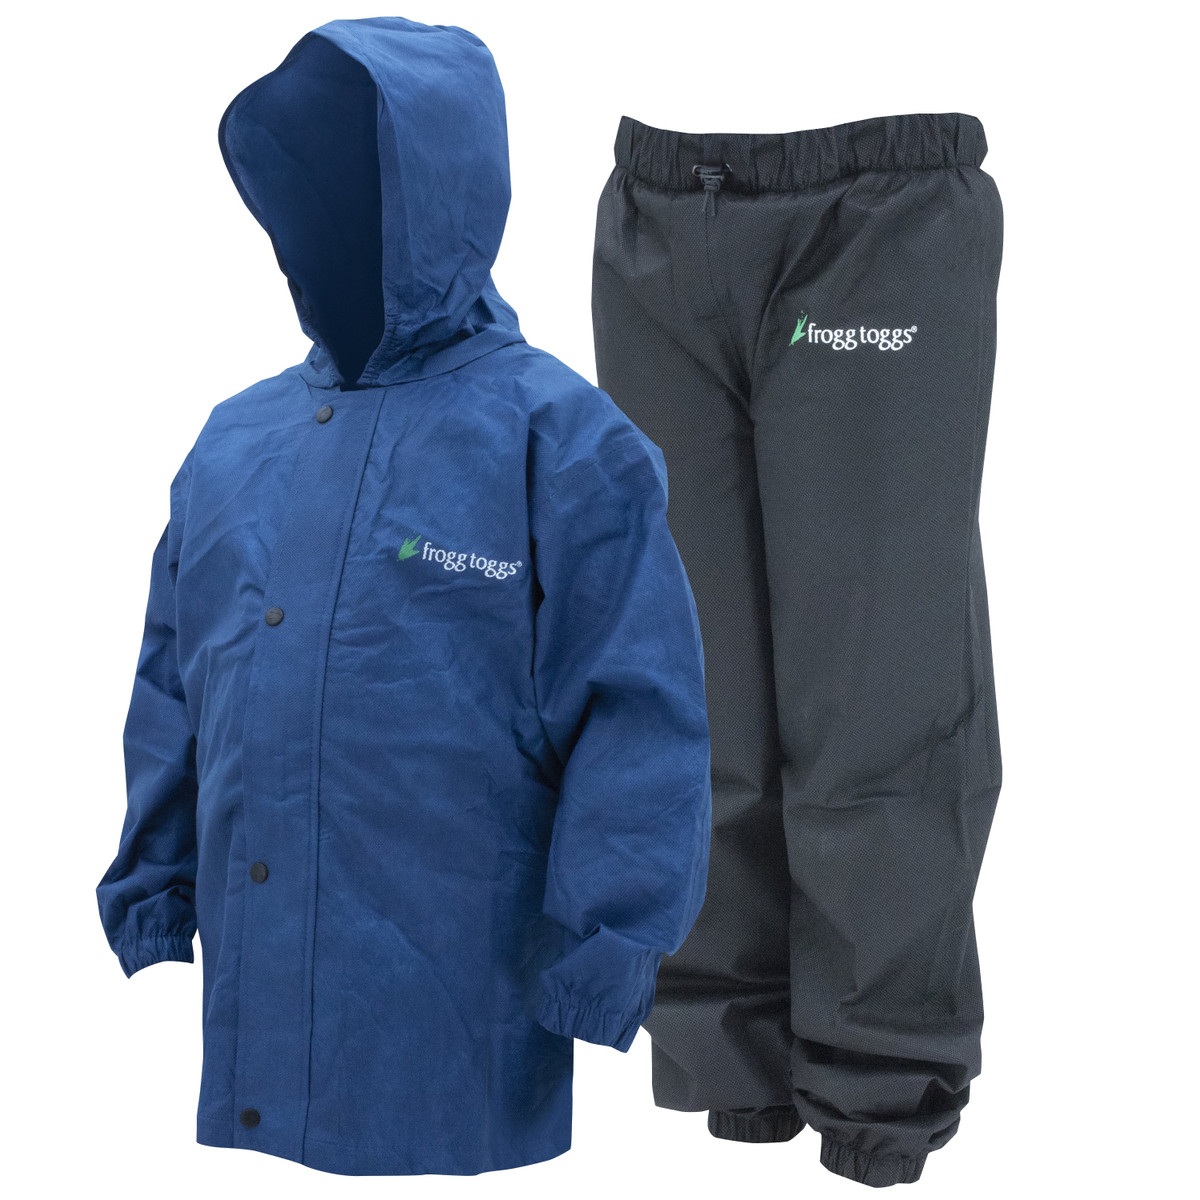 Polly Woggs Youth Rain Suit